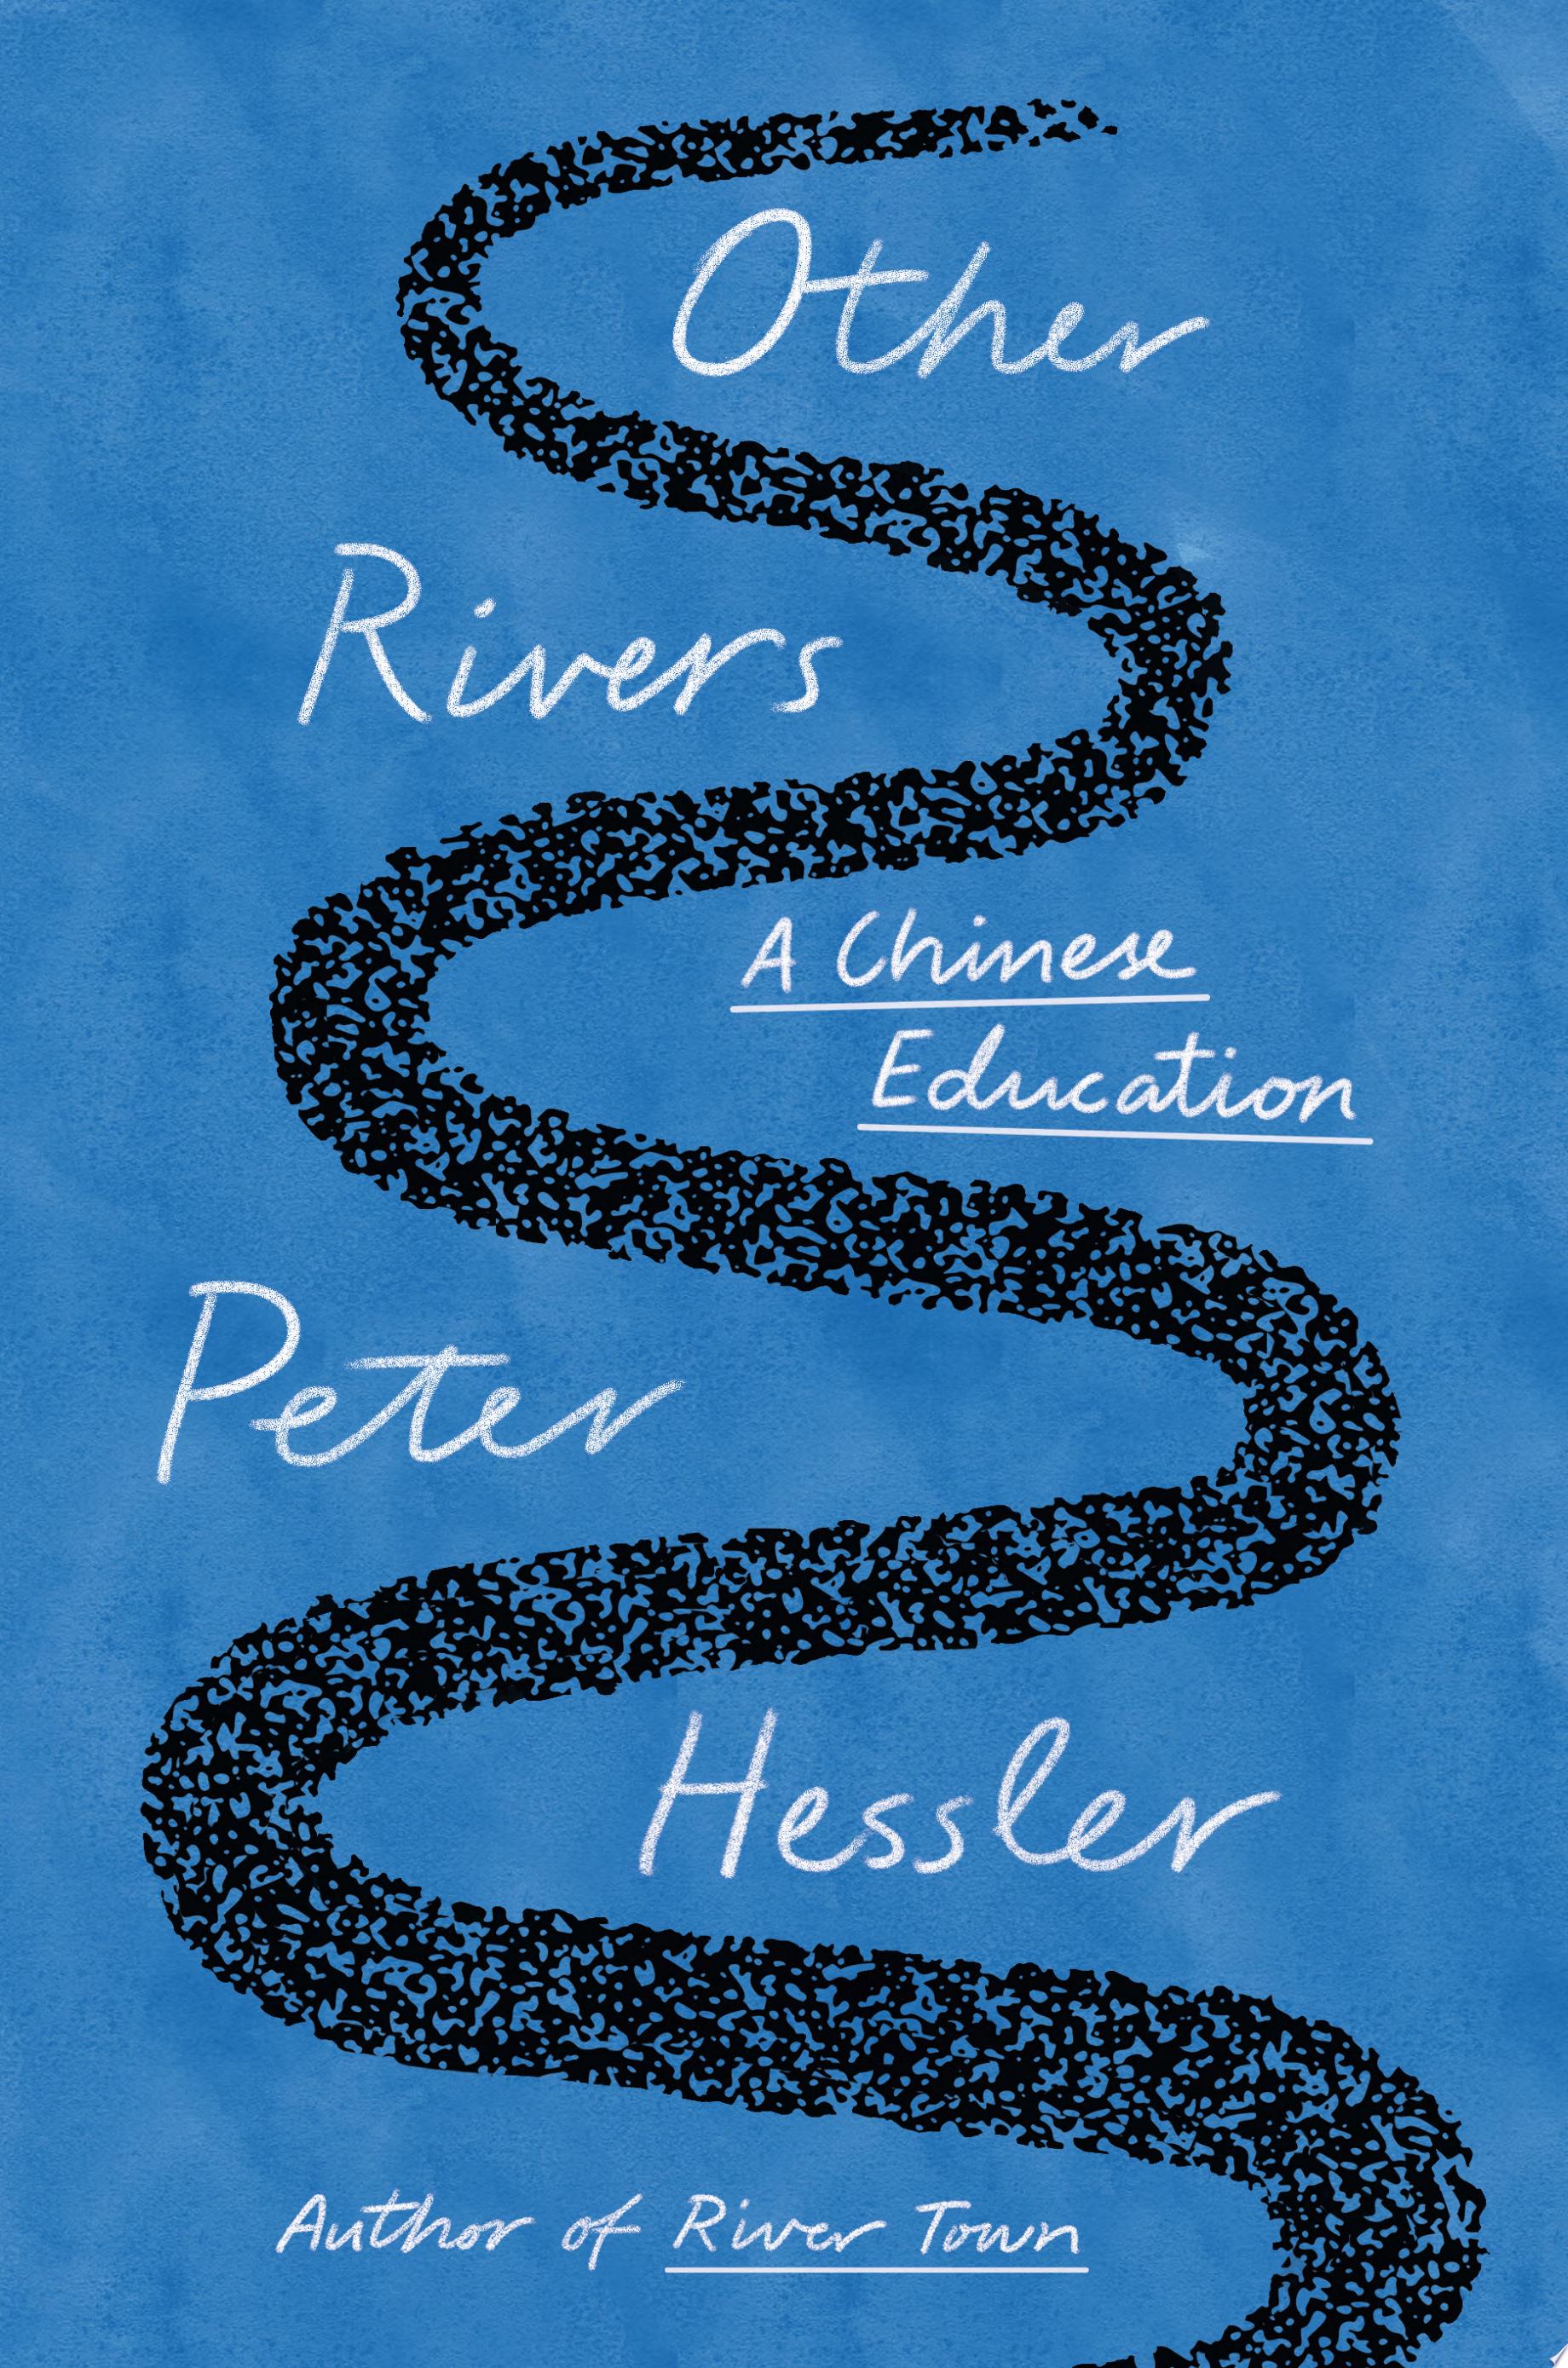 Image for "Other Rivers"